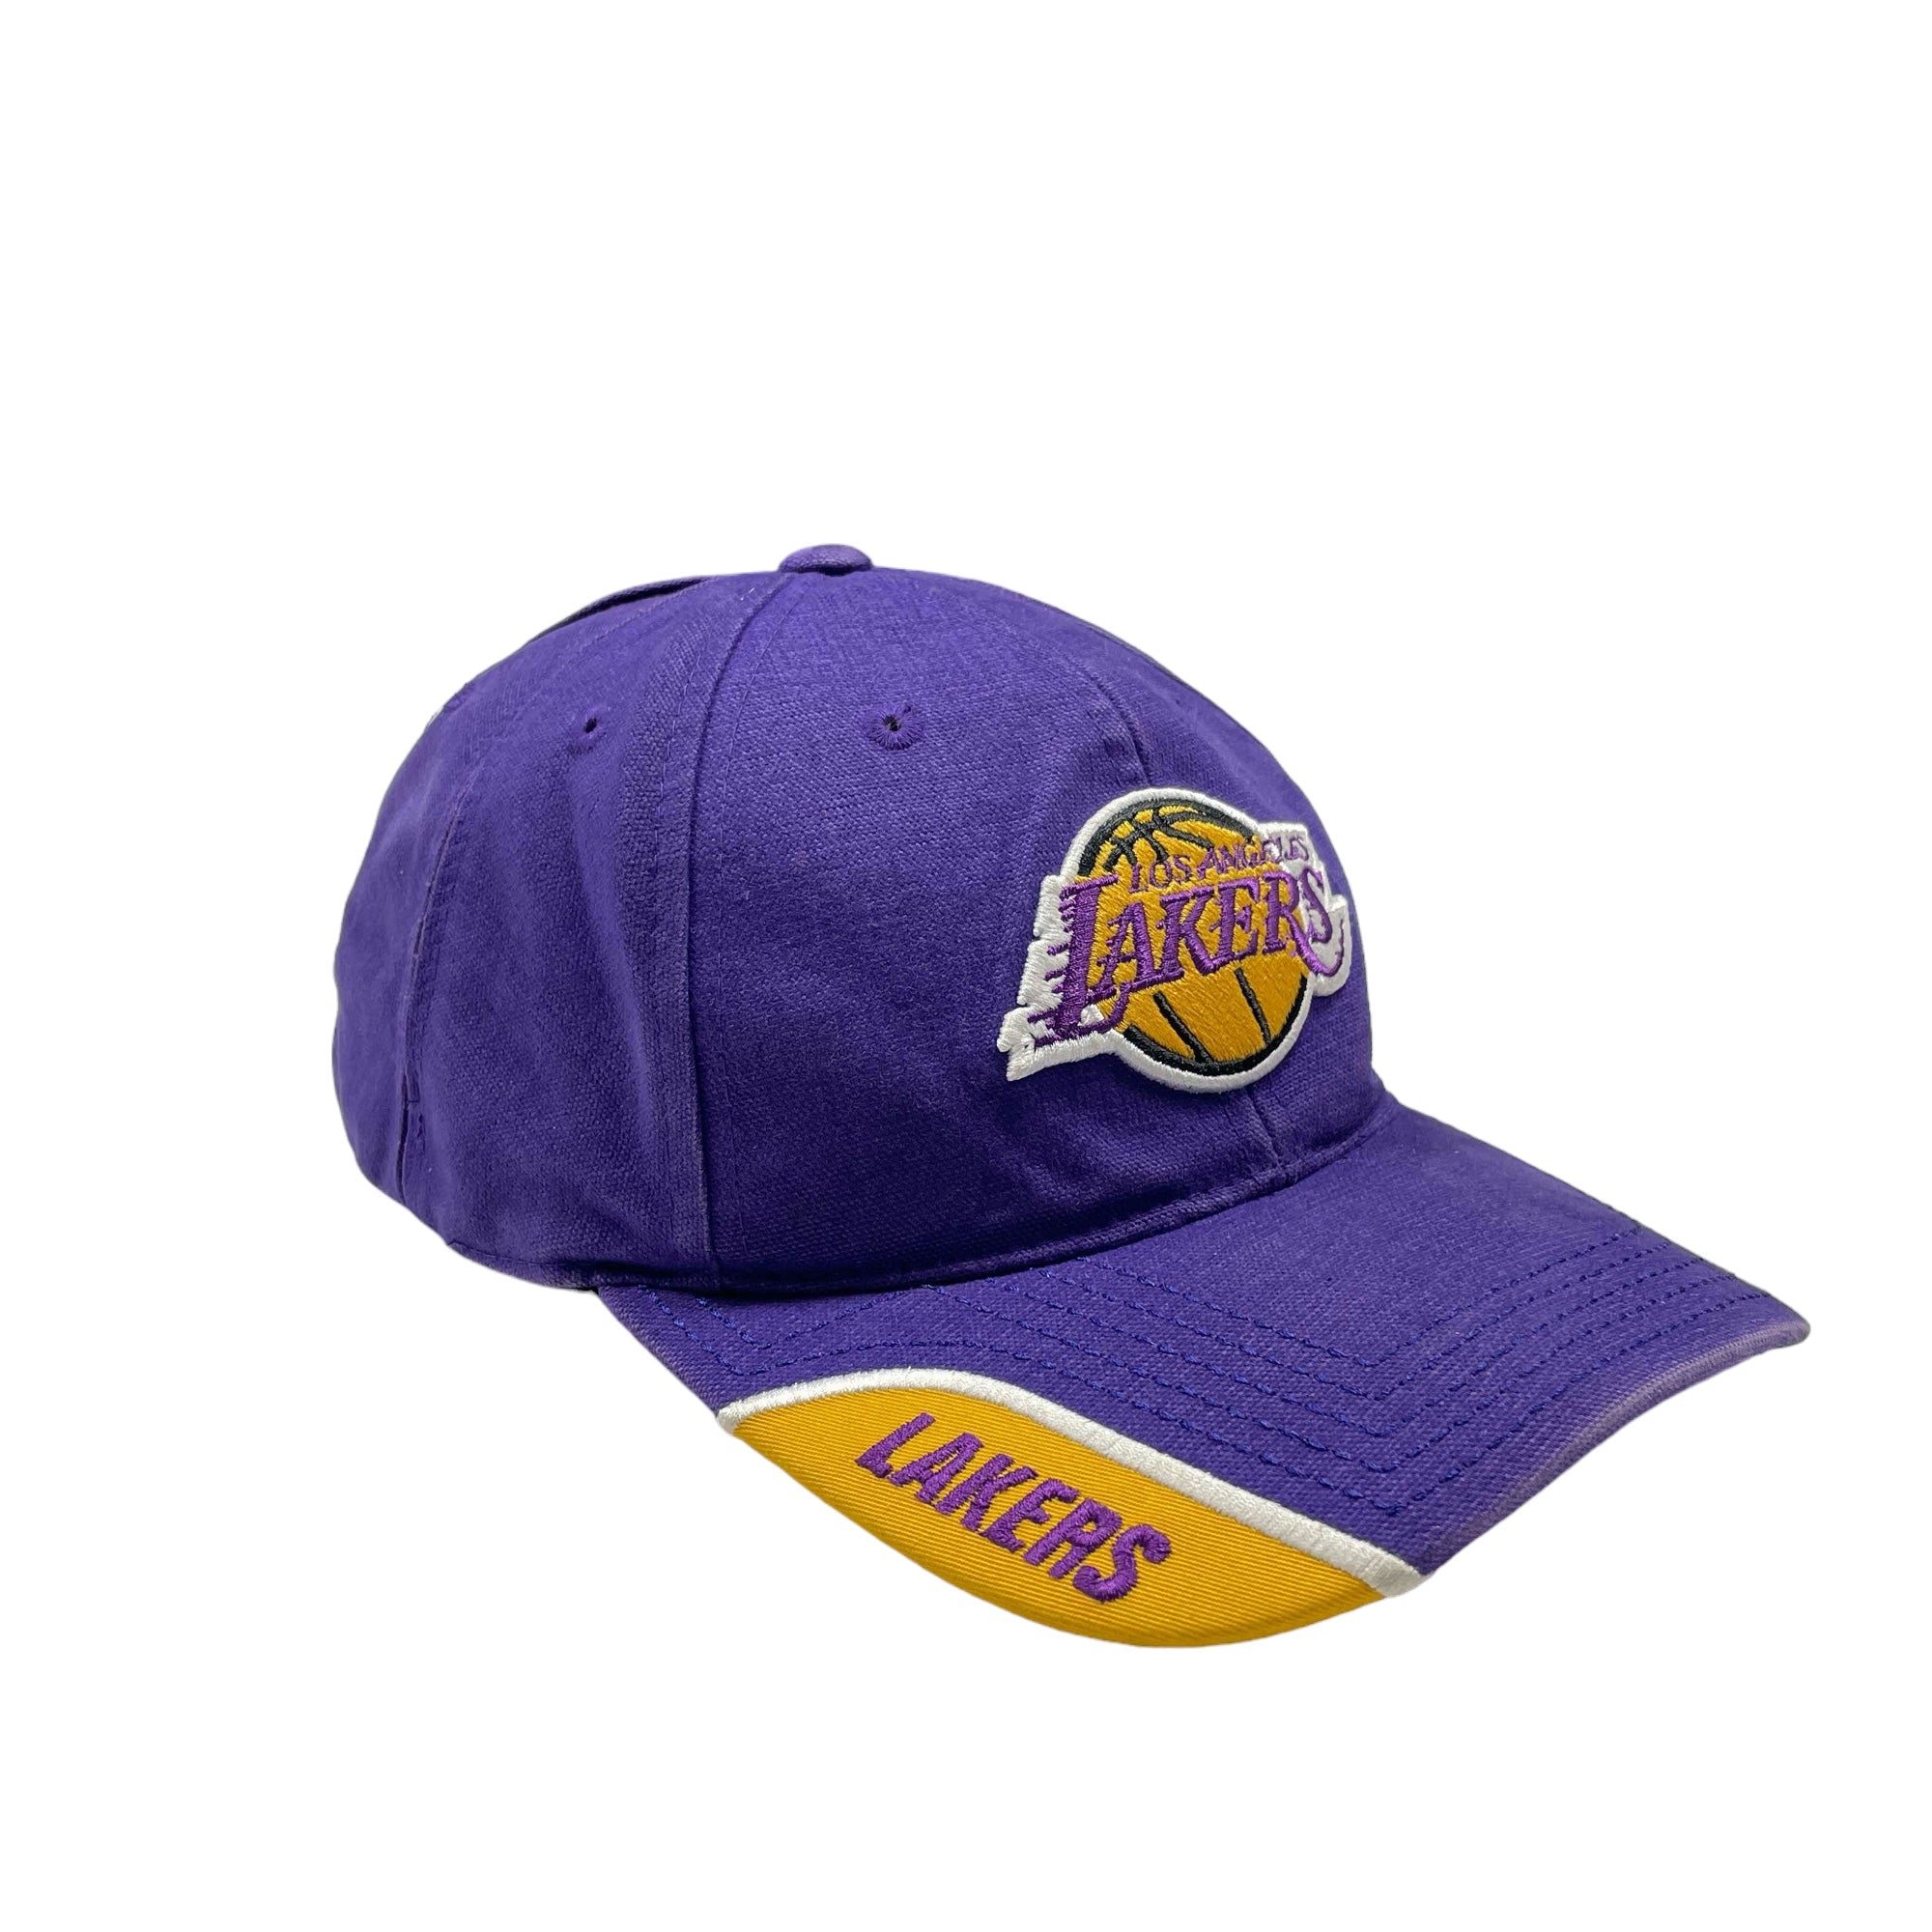 Los Angeles Lakers NBA Cap - One Size